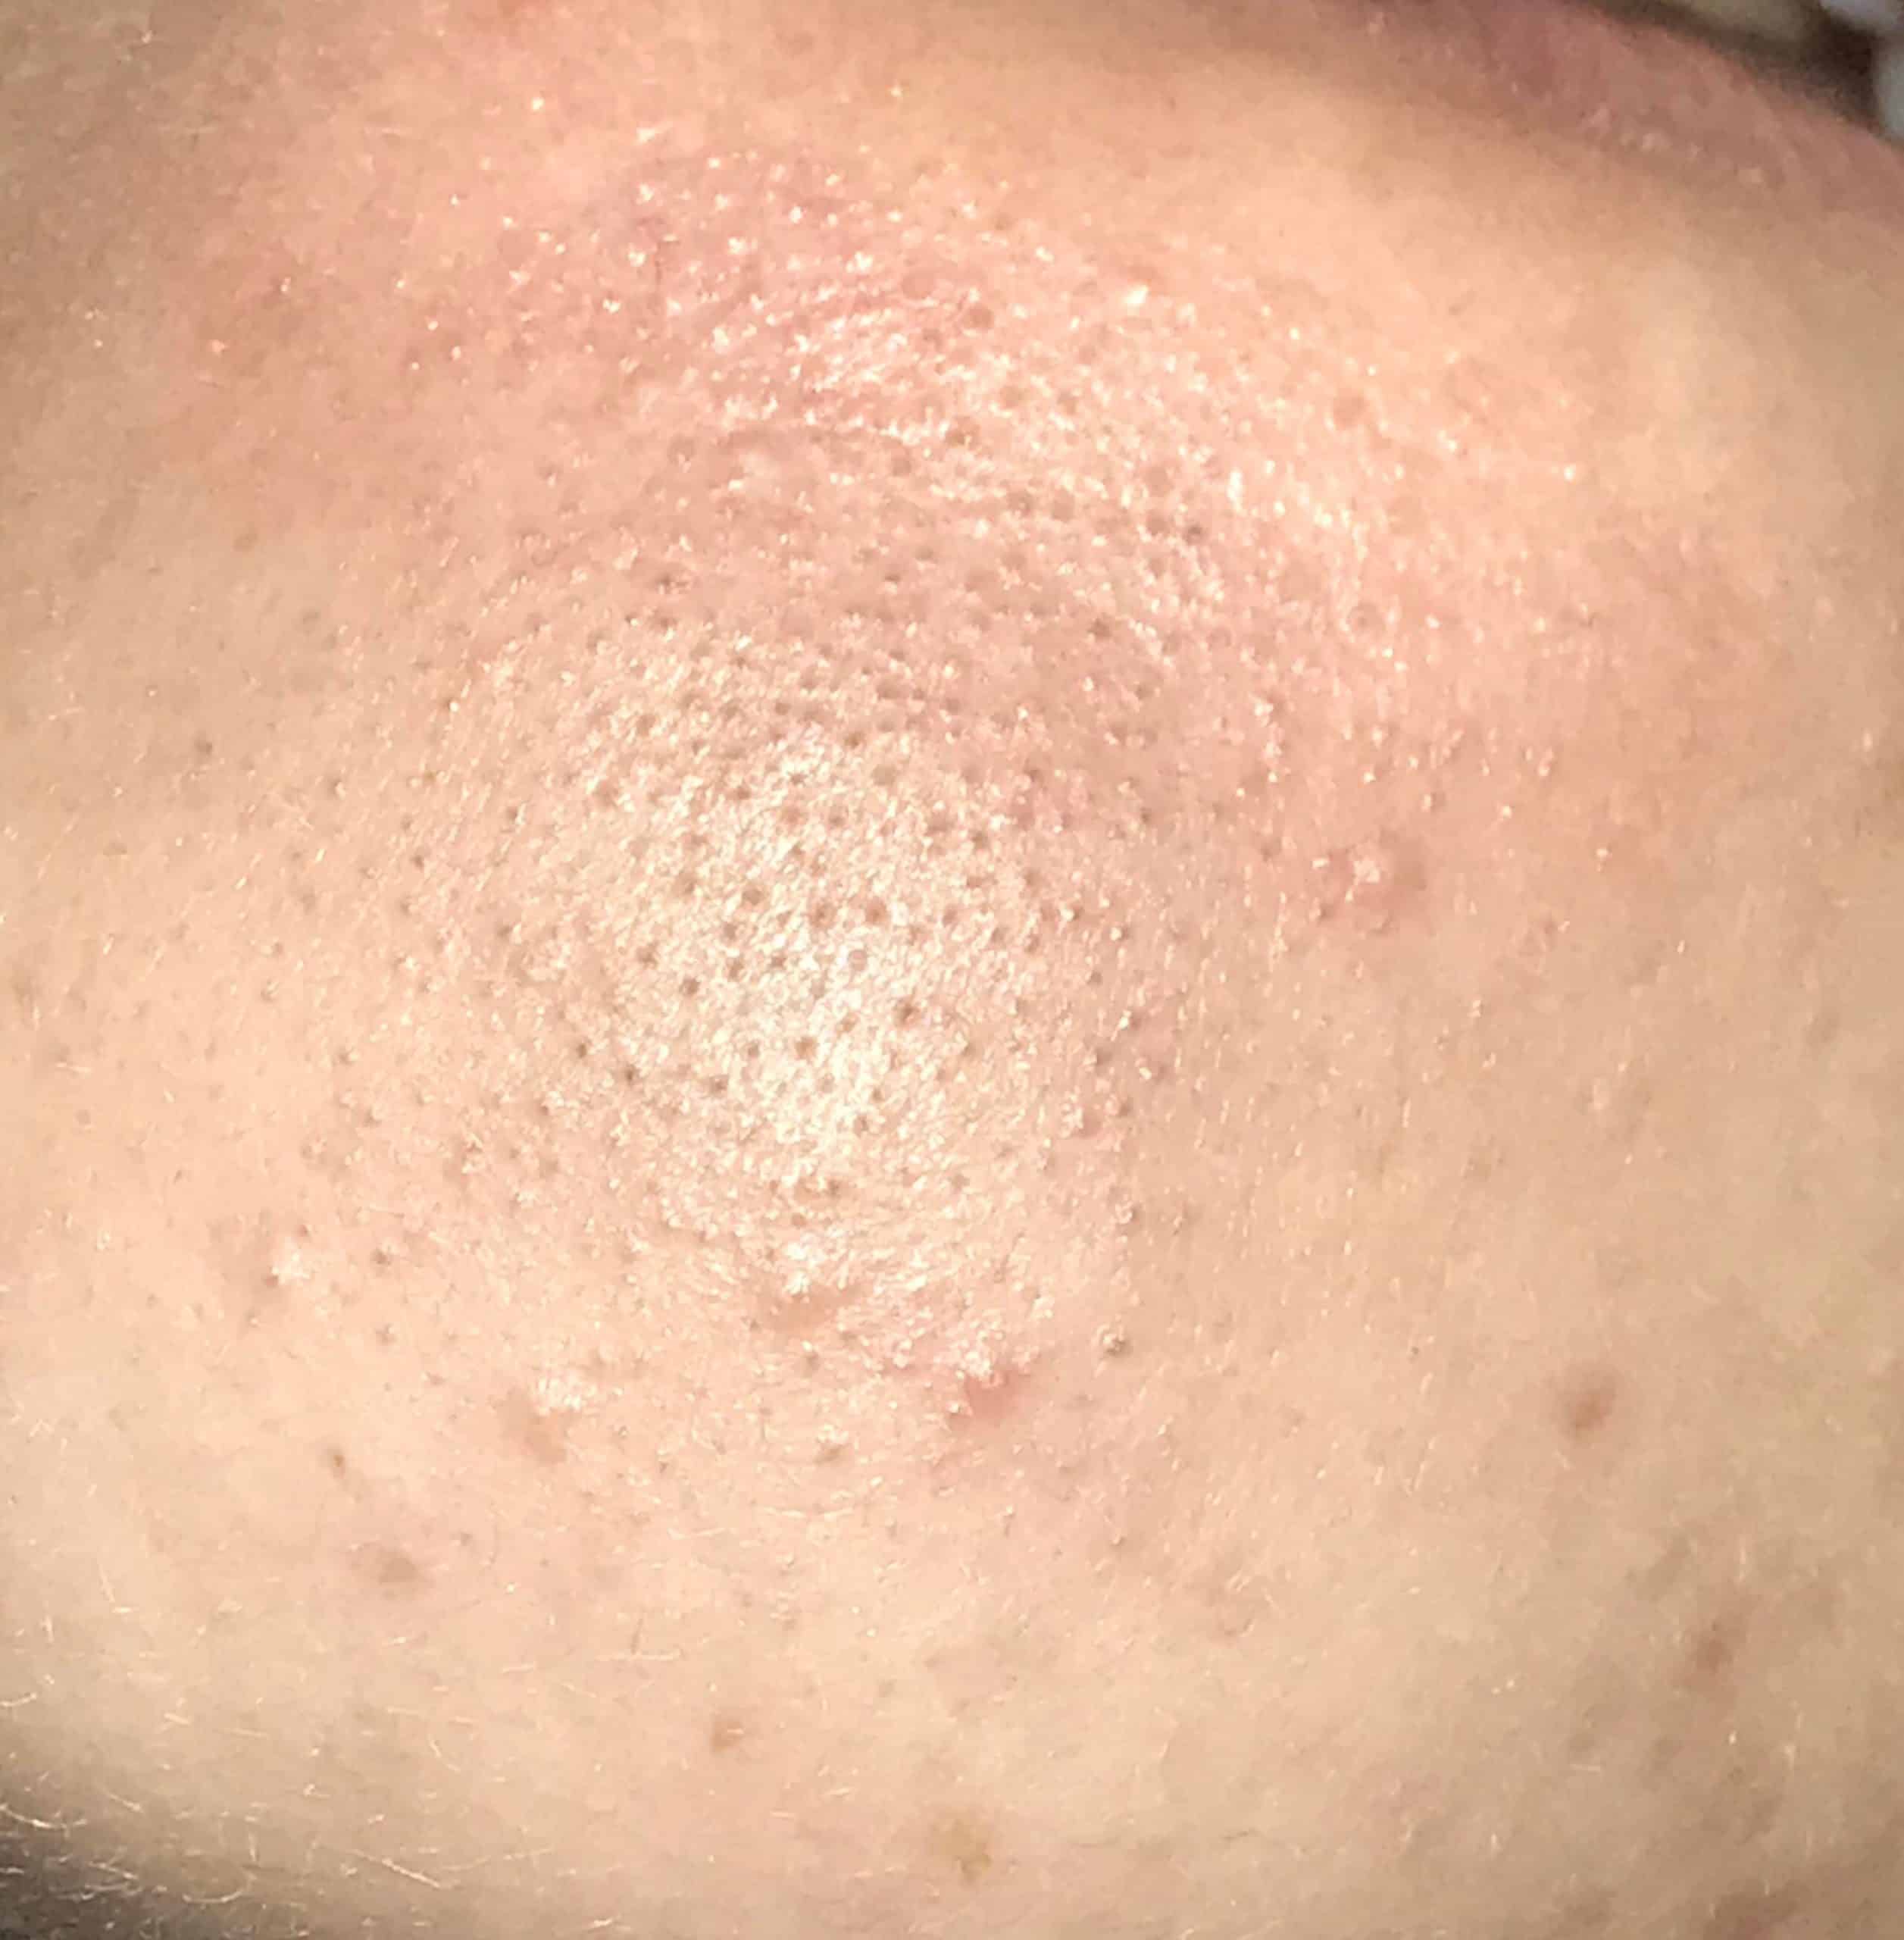 [acne] Can anyone suggest how to help clear this on my chin? Not sure ...